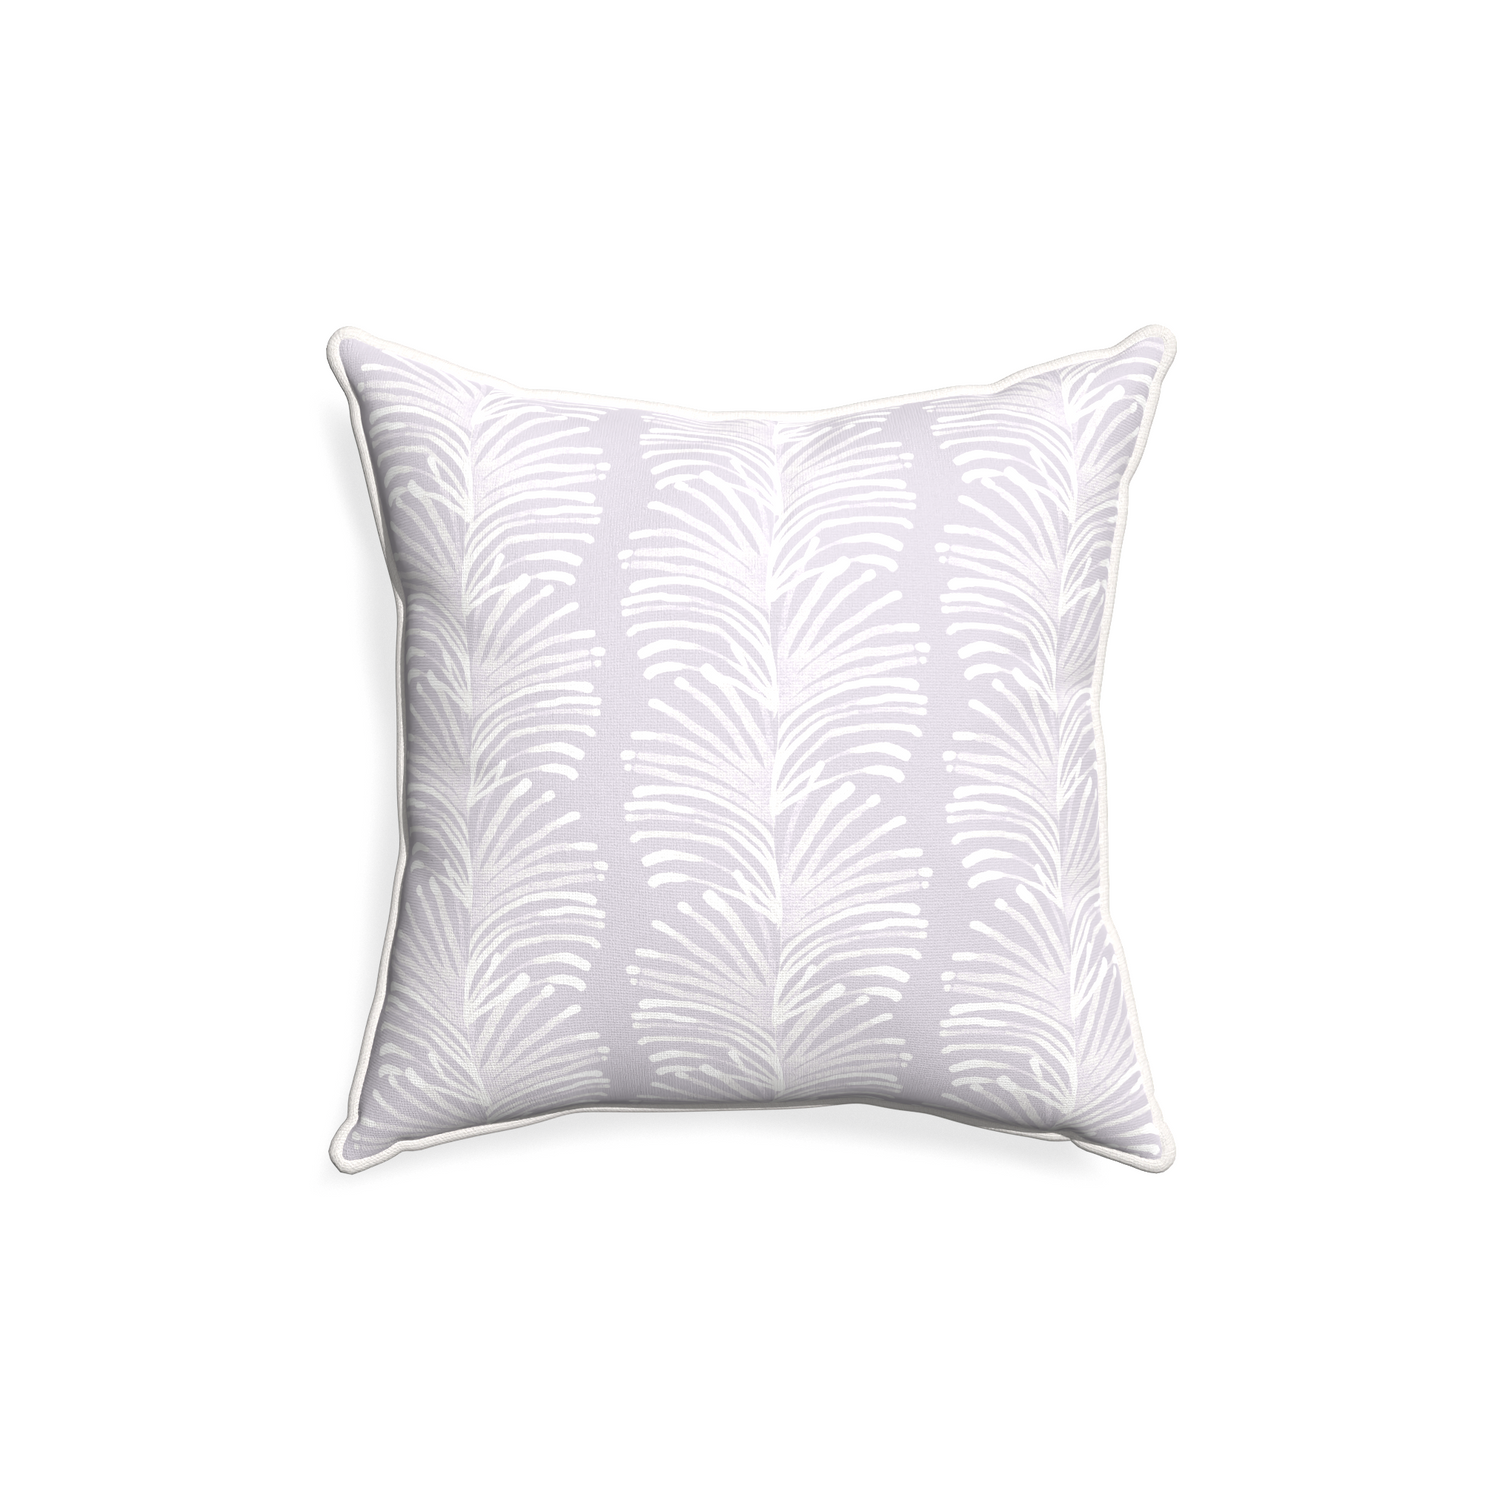 18-square emma lavender custom pillow with snow piping on white background